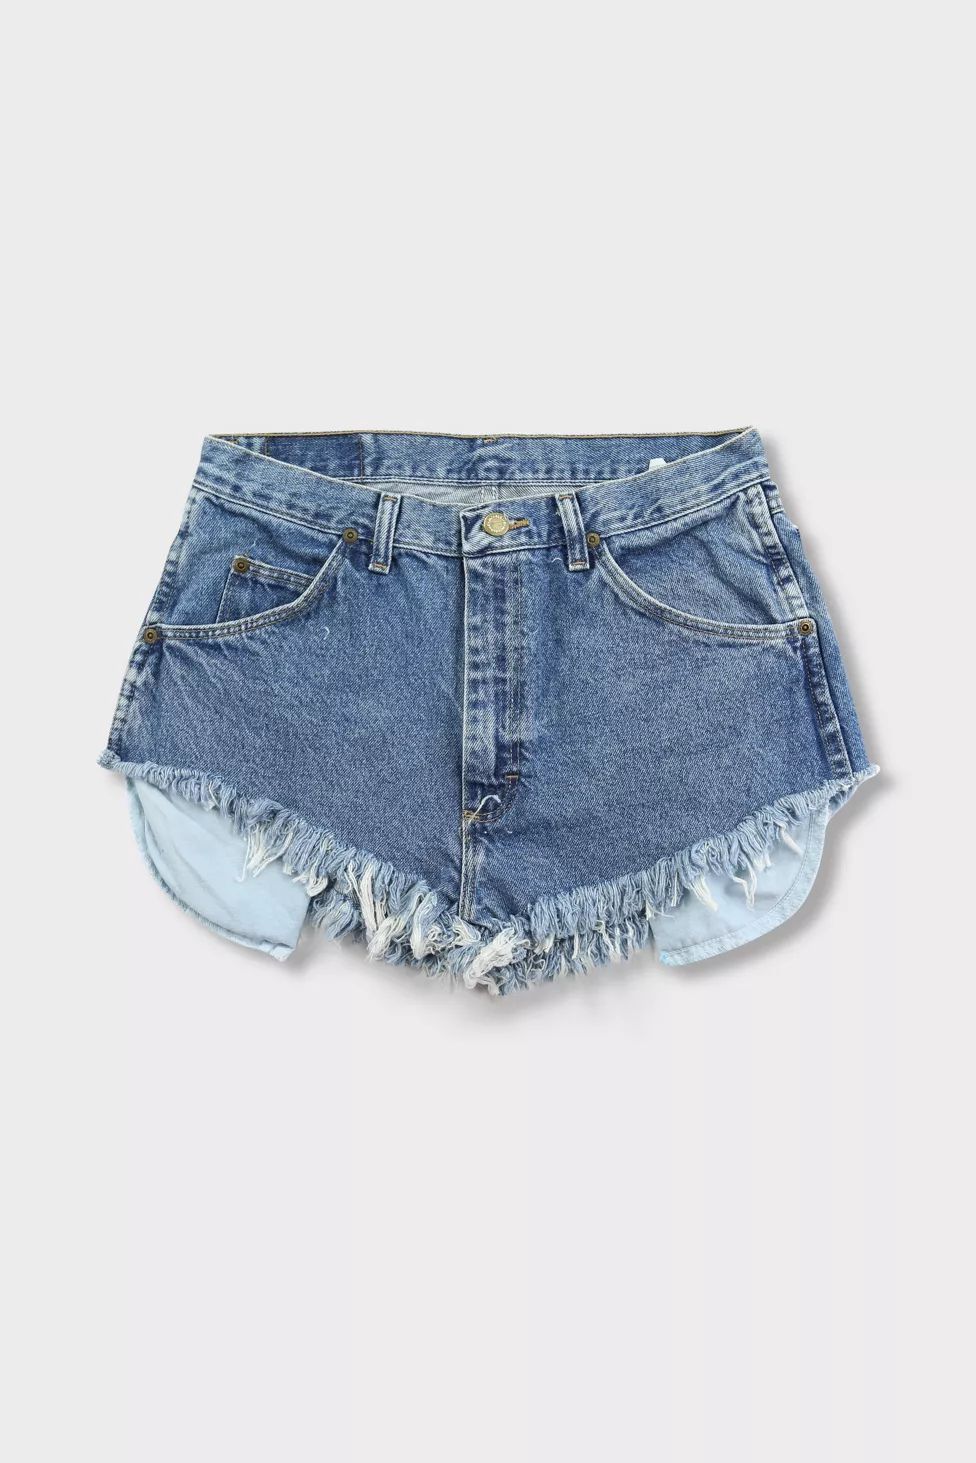 Vintage 90s Wrangler Distressed Cut Off Shorts | Urban Outfitters (US and RoW)